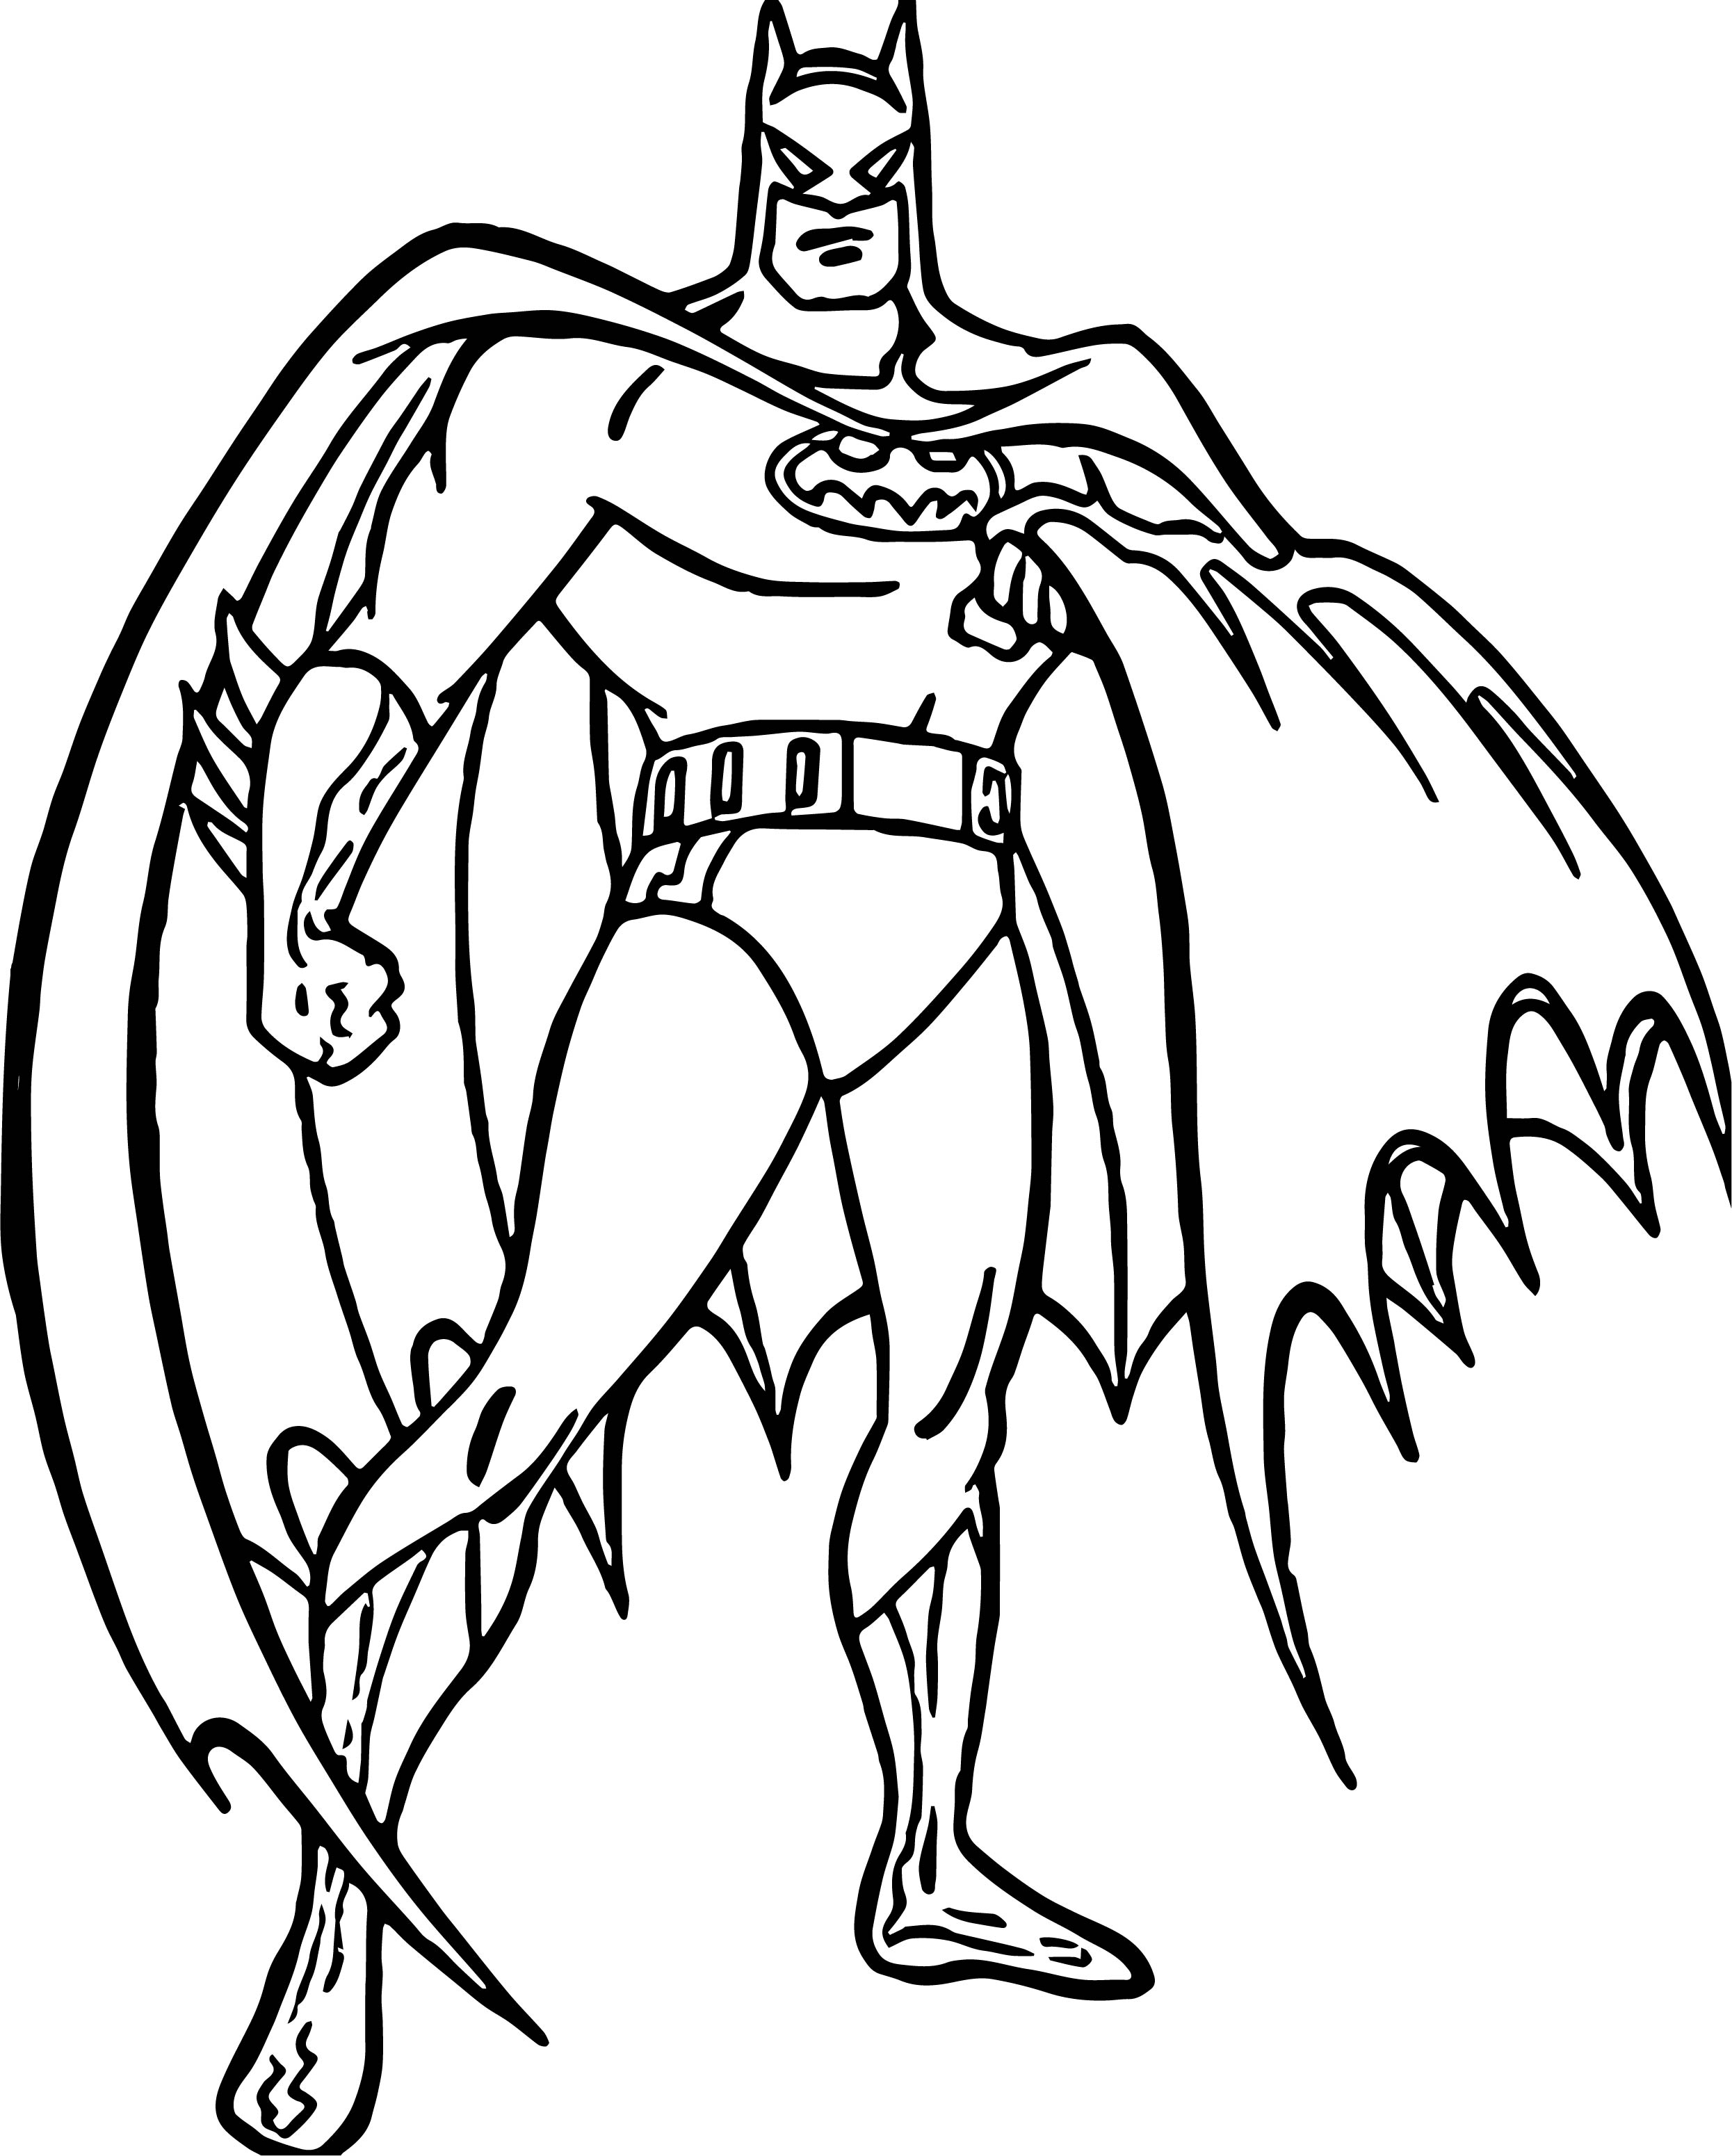 Batman Outline Drawing Free download on ClipArtMag